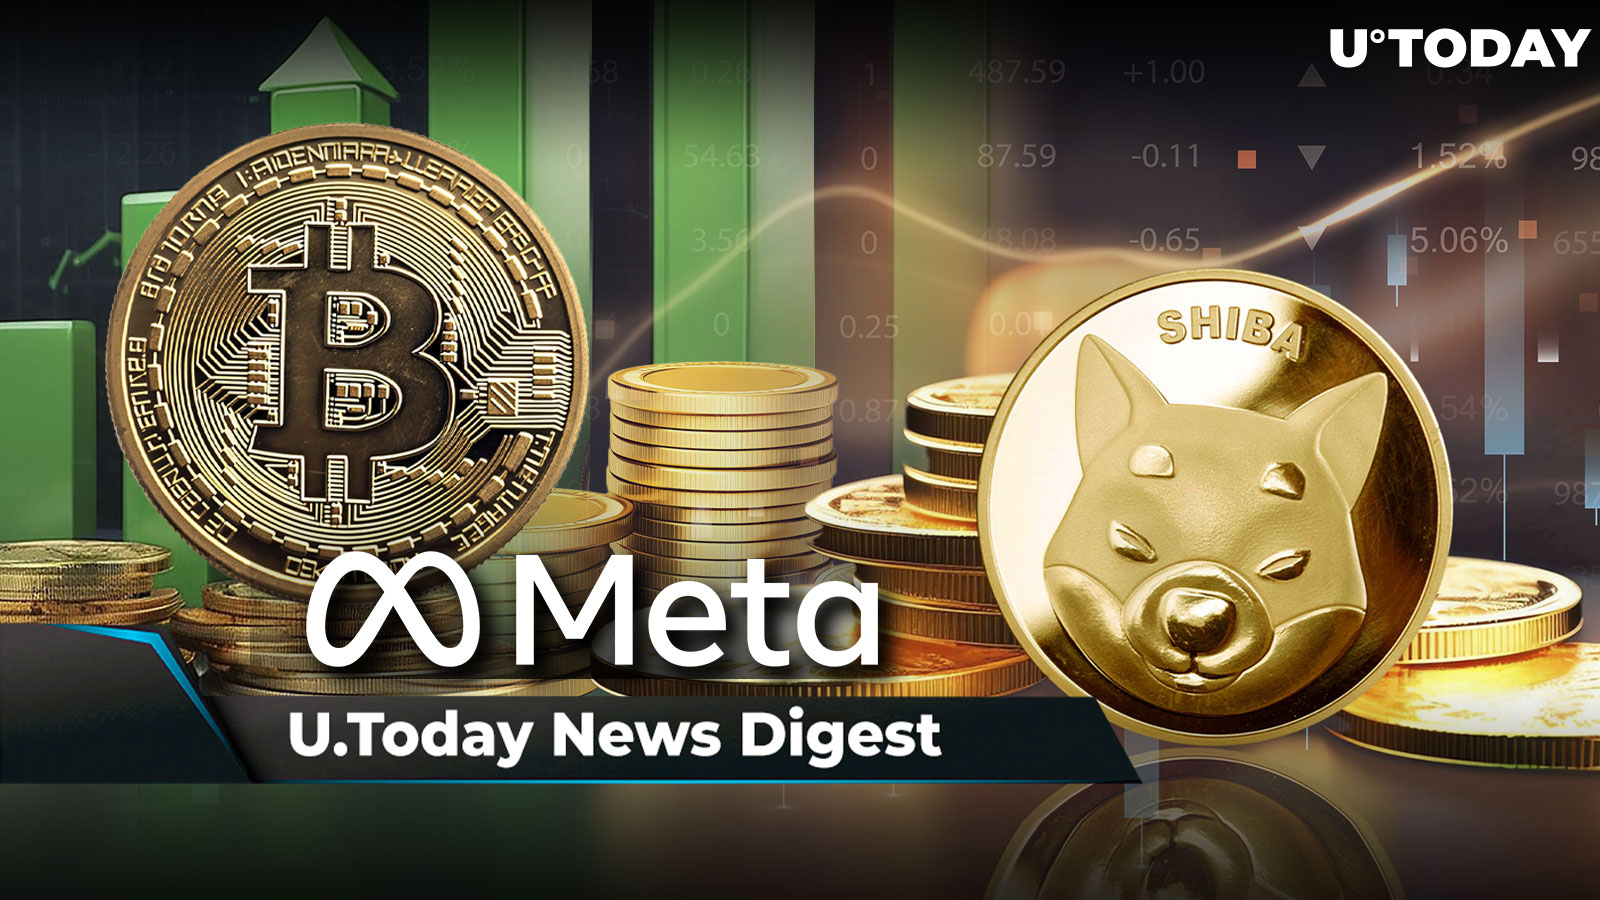 Bitcoin Surpasses Meta by Market Cap, Shiba Inu Becomes 10th Largest Crypto, XRP New Listings on Horizon From Major Crypto Exchange: Crypto News Digest by U.Today